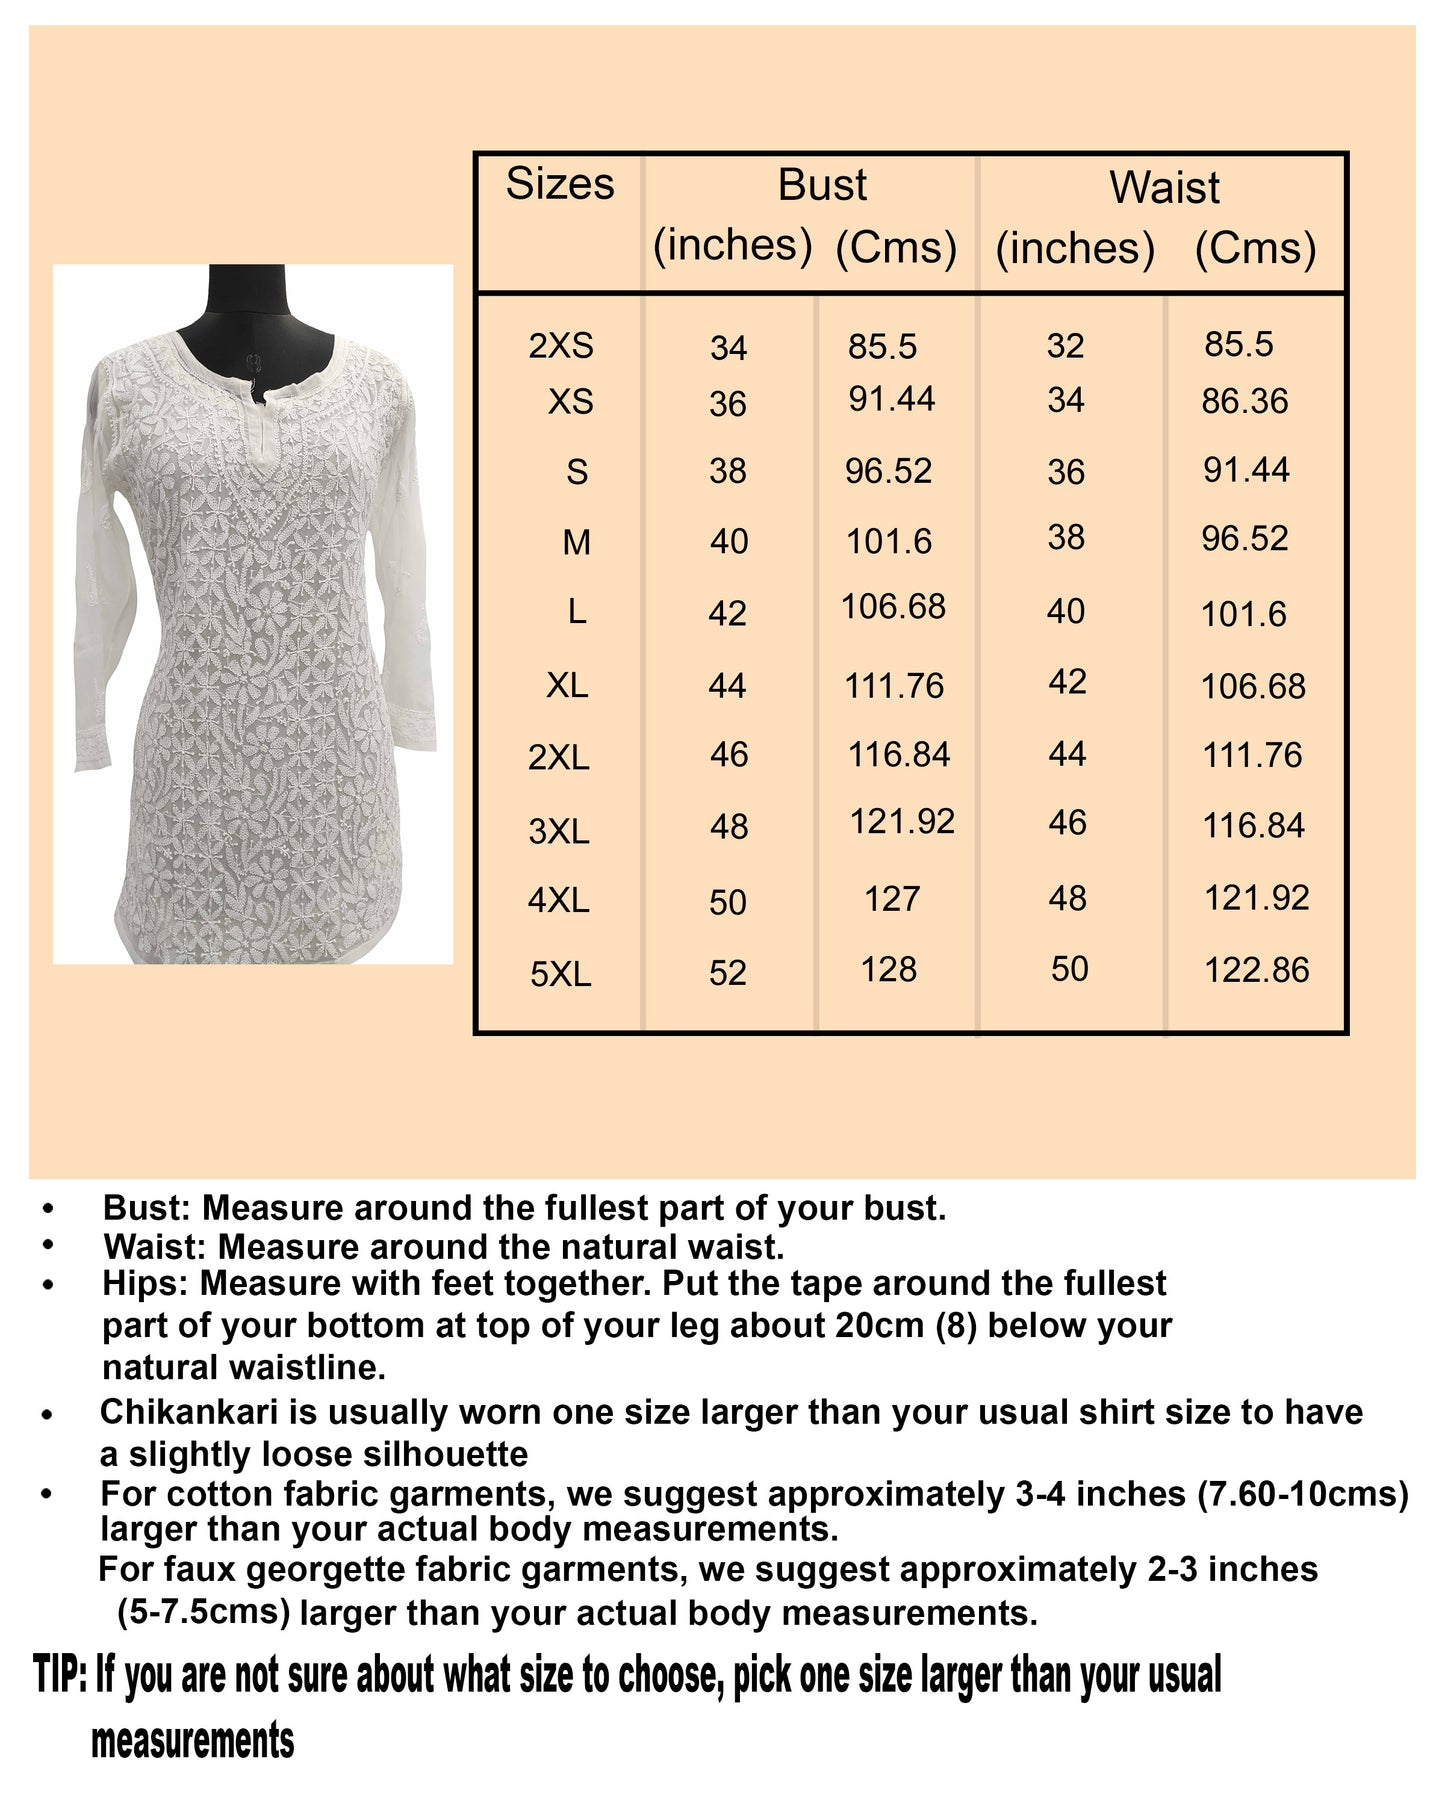 Shyamal Chikan Hand Embroidered Fawn Viscose Georgette Lucknowi Chikankari Angrakha Short Top - S17816